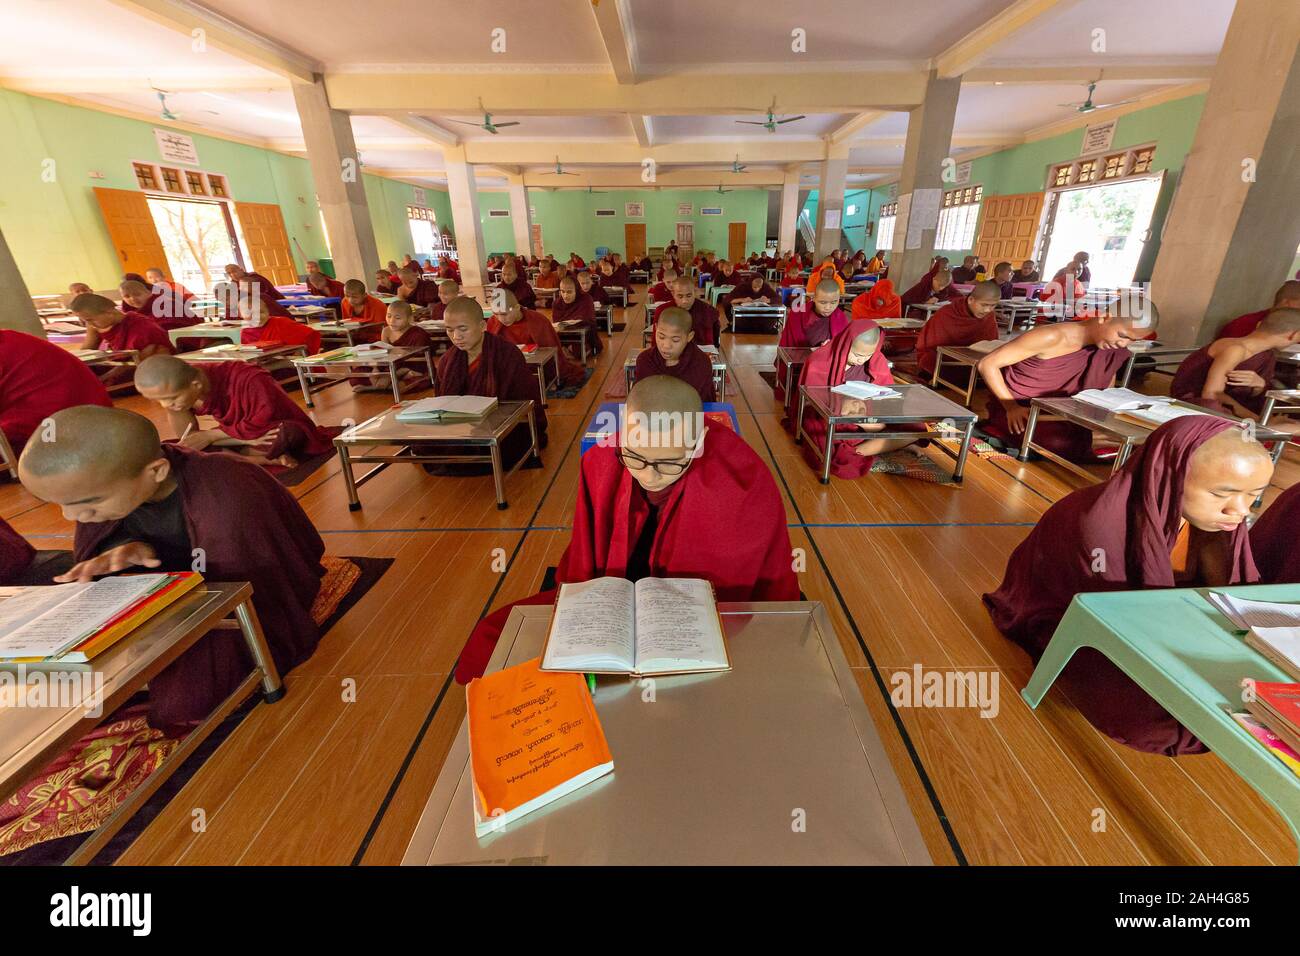 Monks reading and studying in the classroom of the monastery in Mandalay, Myanmar Stock Photo